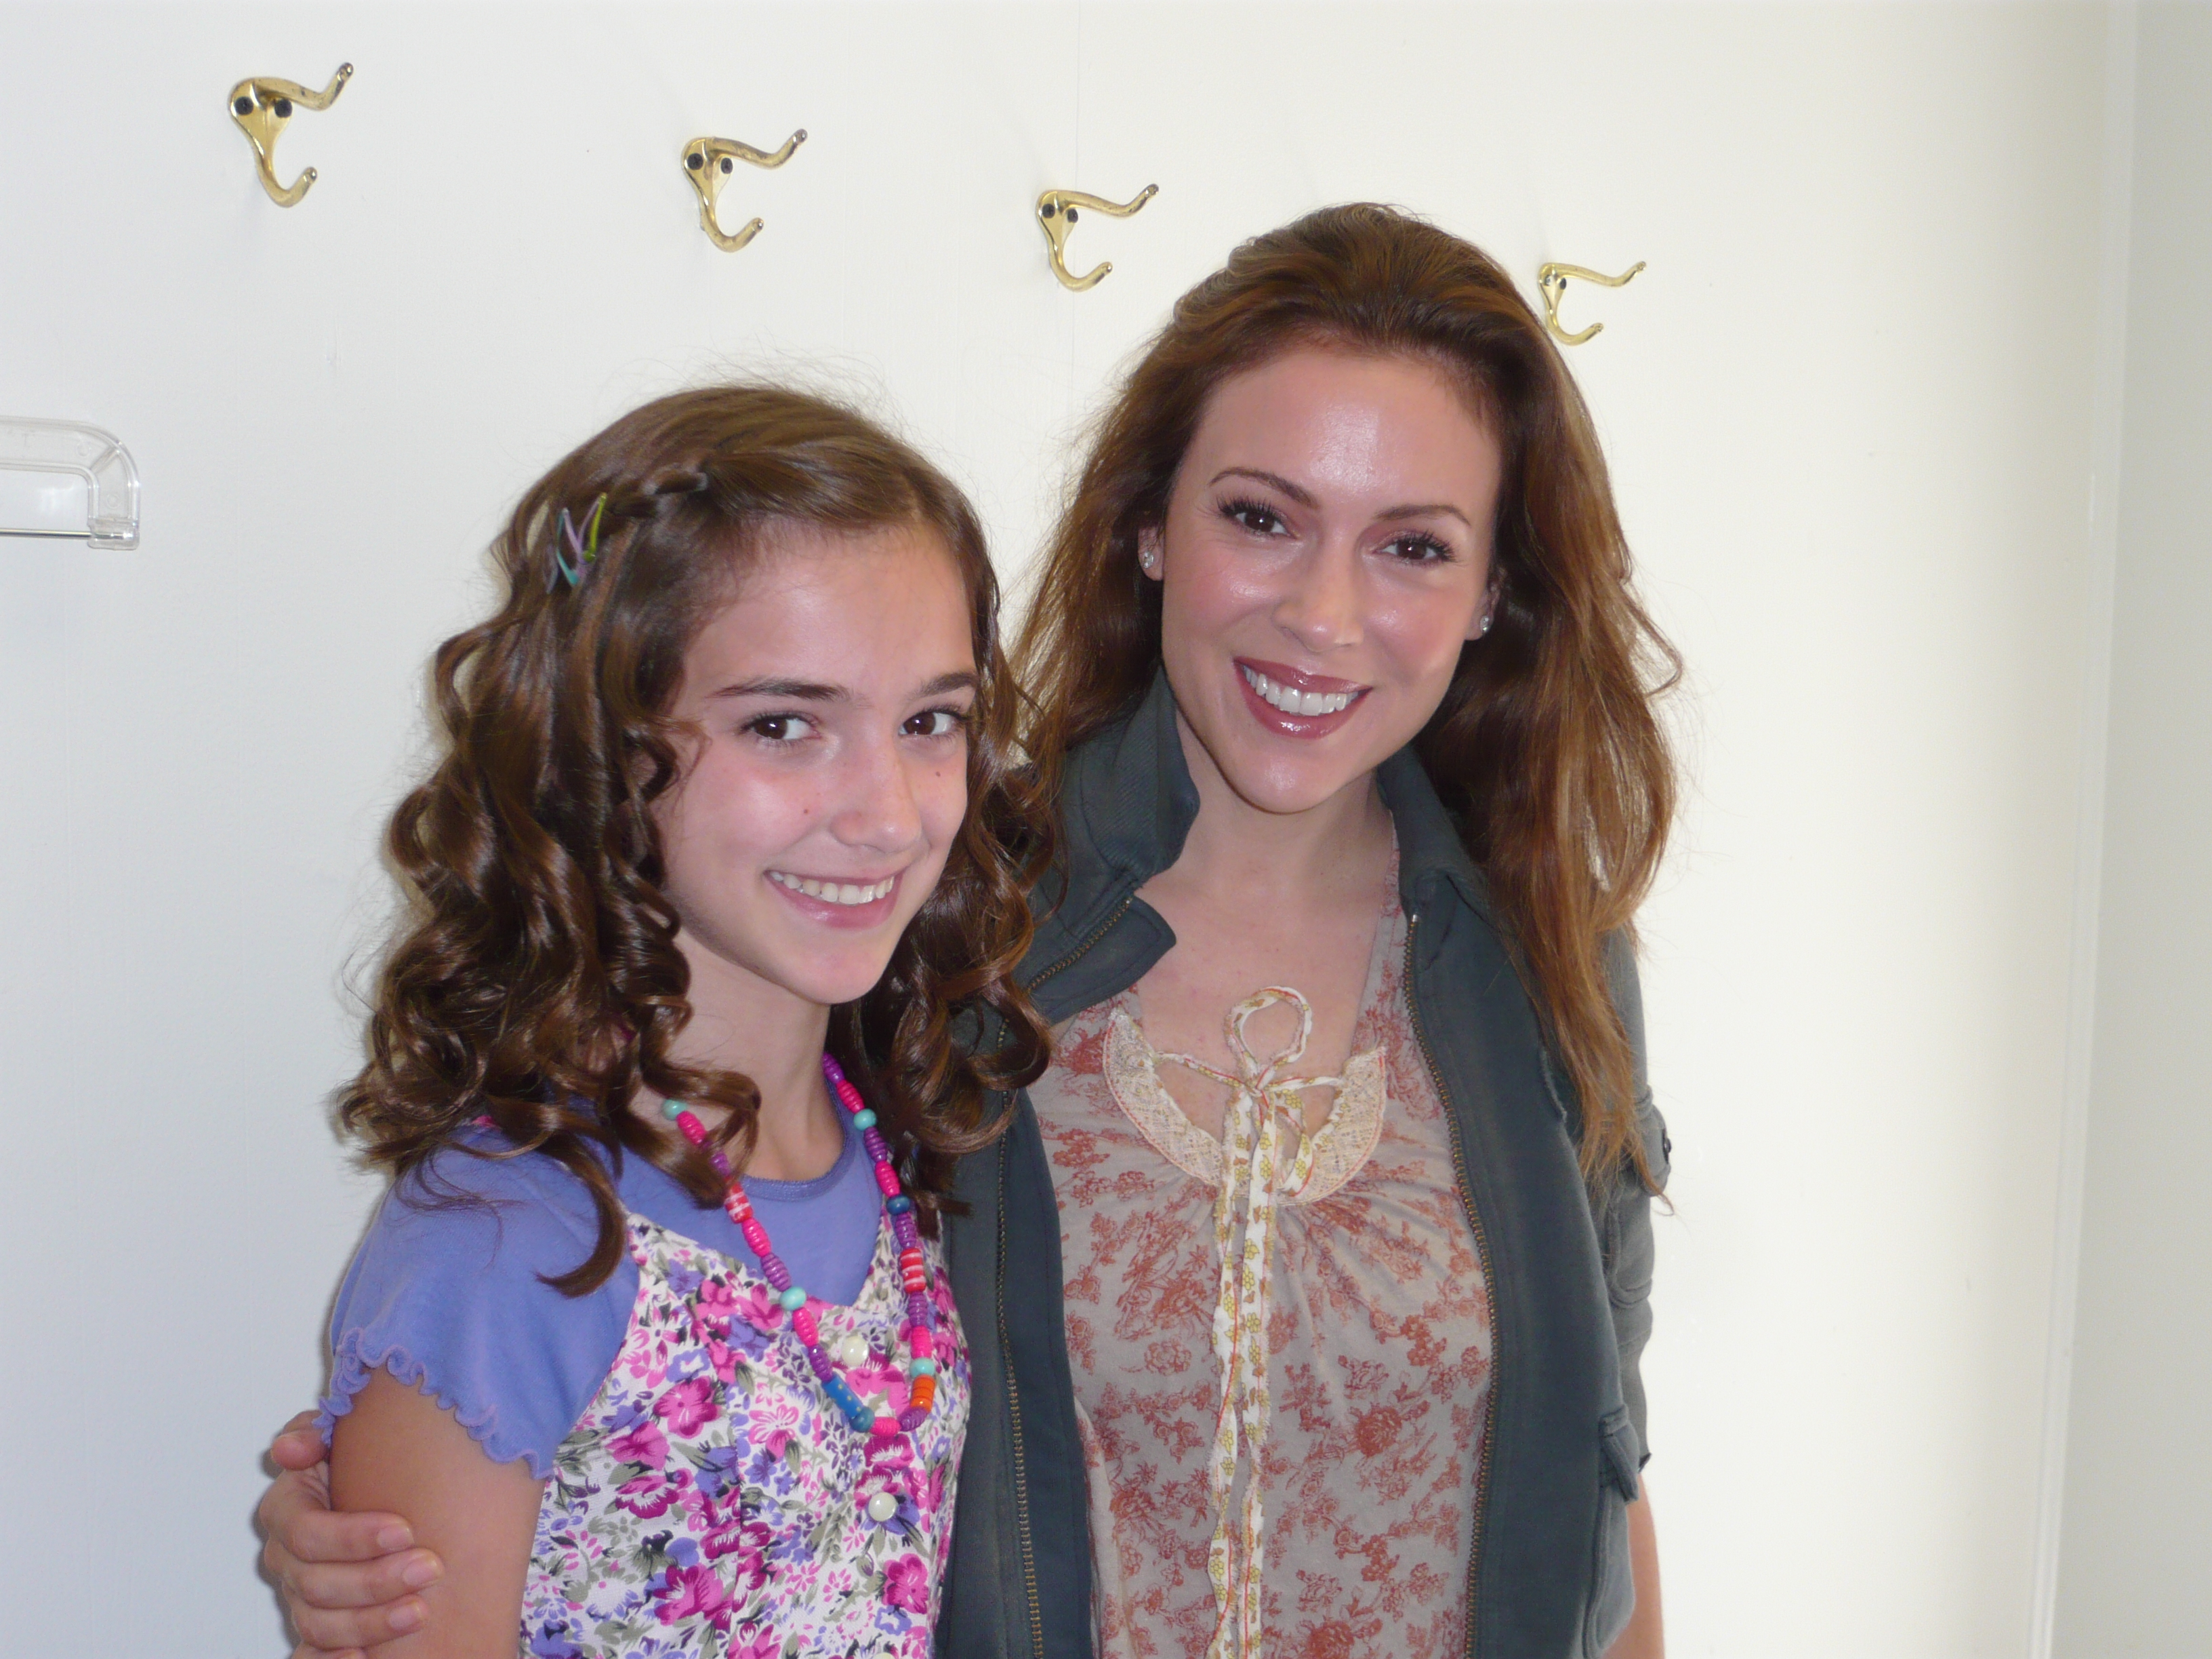 Liv (as young Lou...Alyssa Milano) with Alyssa Milano on the set of the pilot 